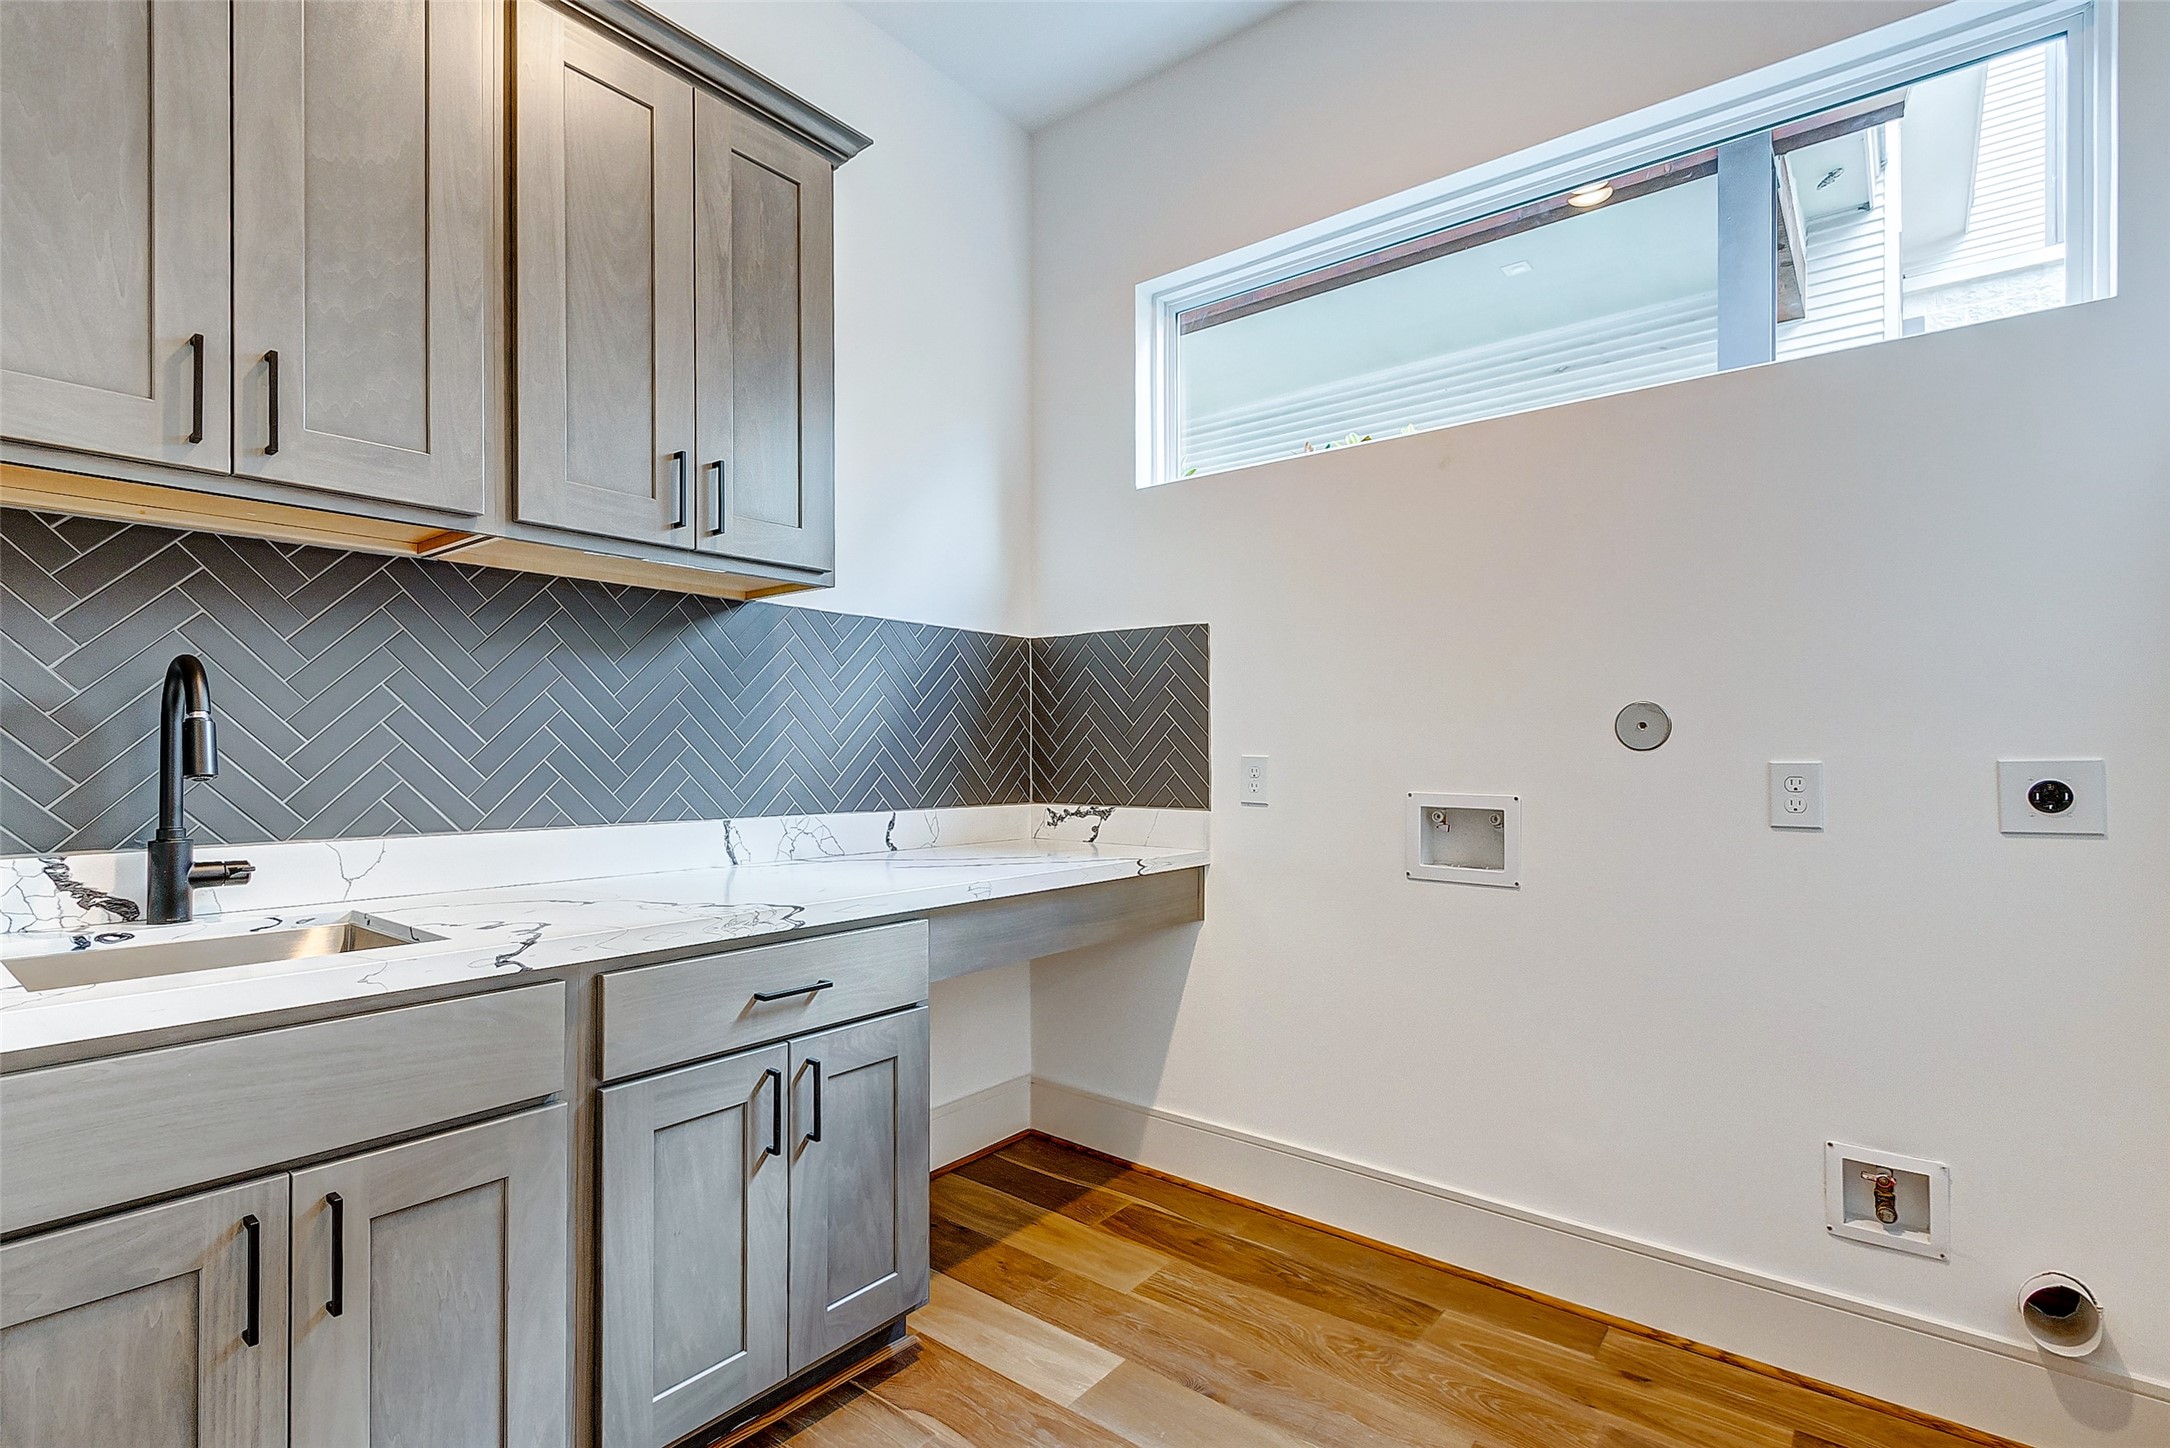 The oversized utility room is accommodating to a large front or top load washer and dryer and features additional room for a secondary fridge!